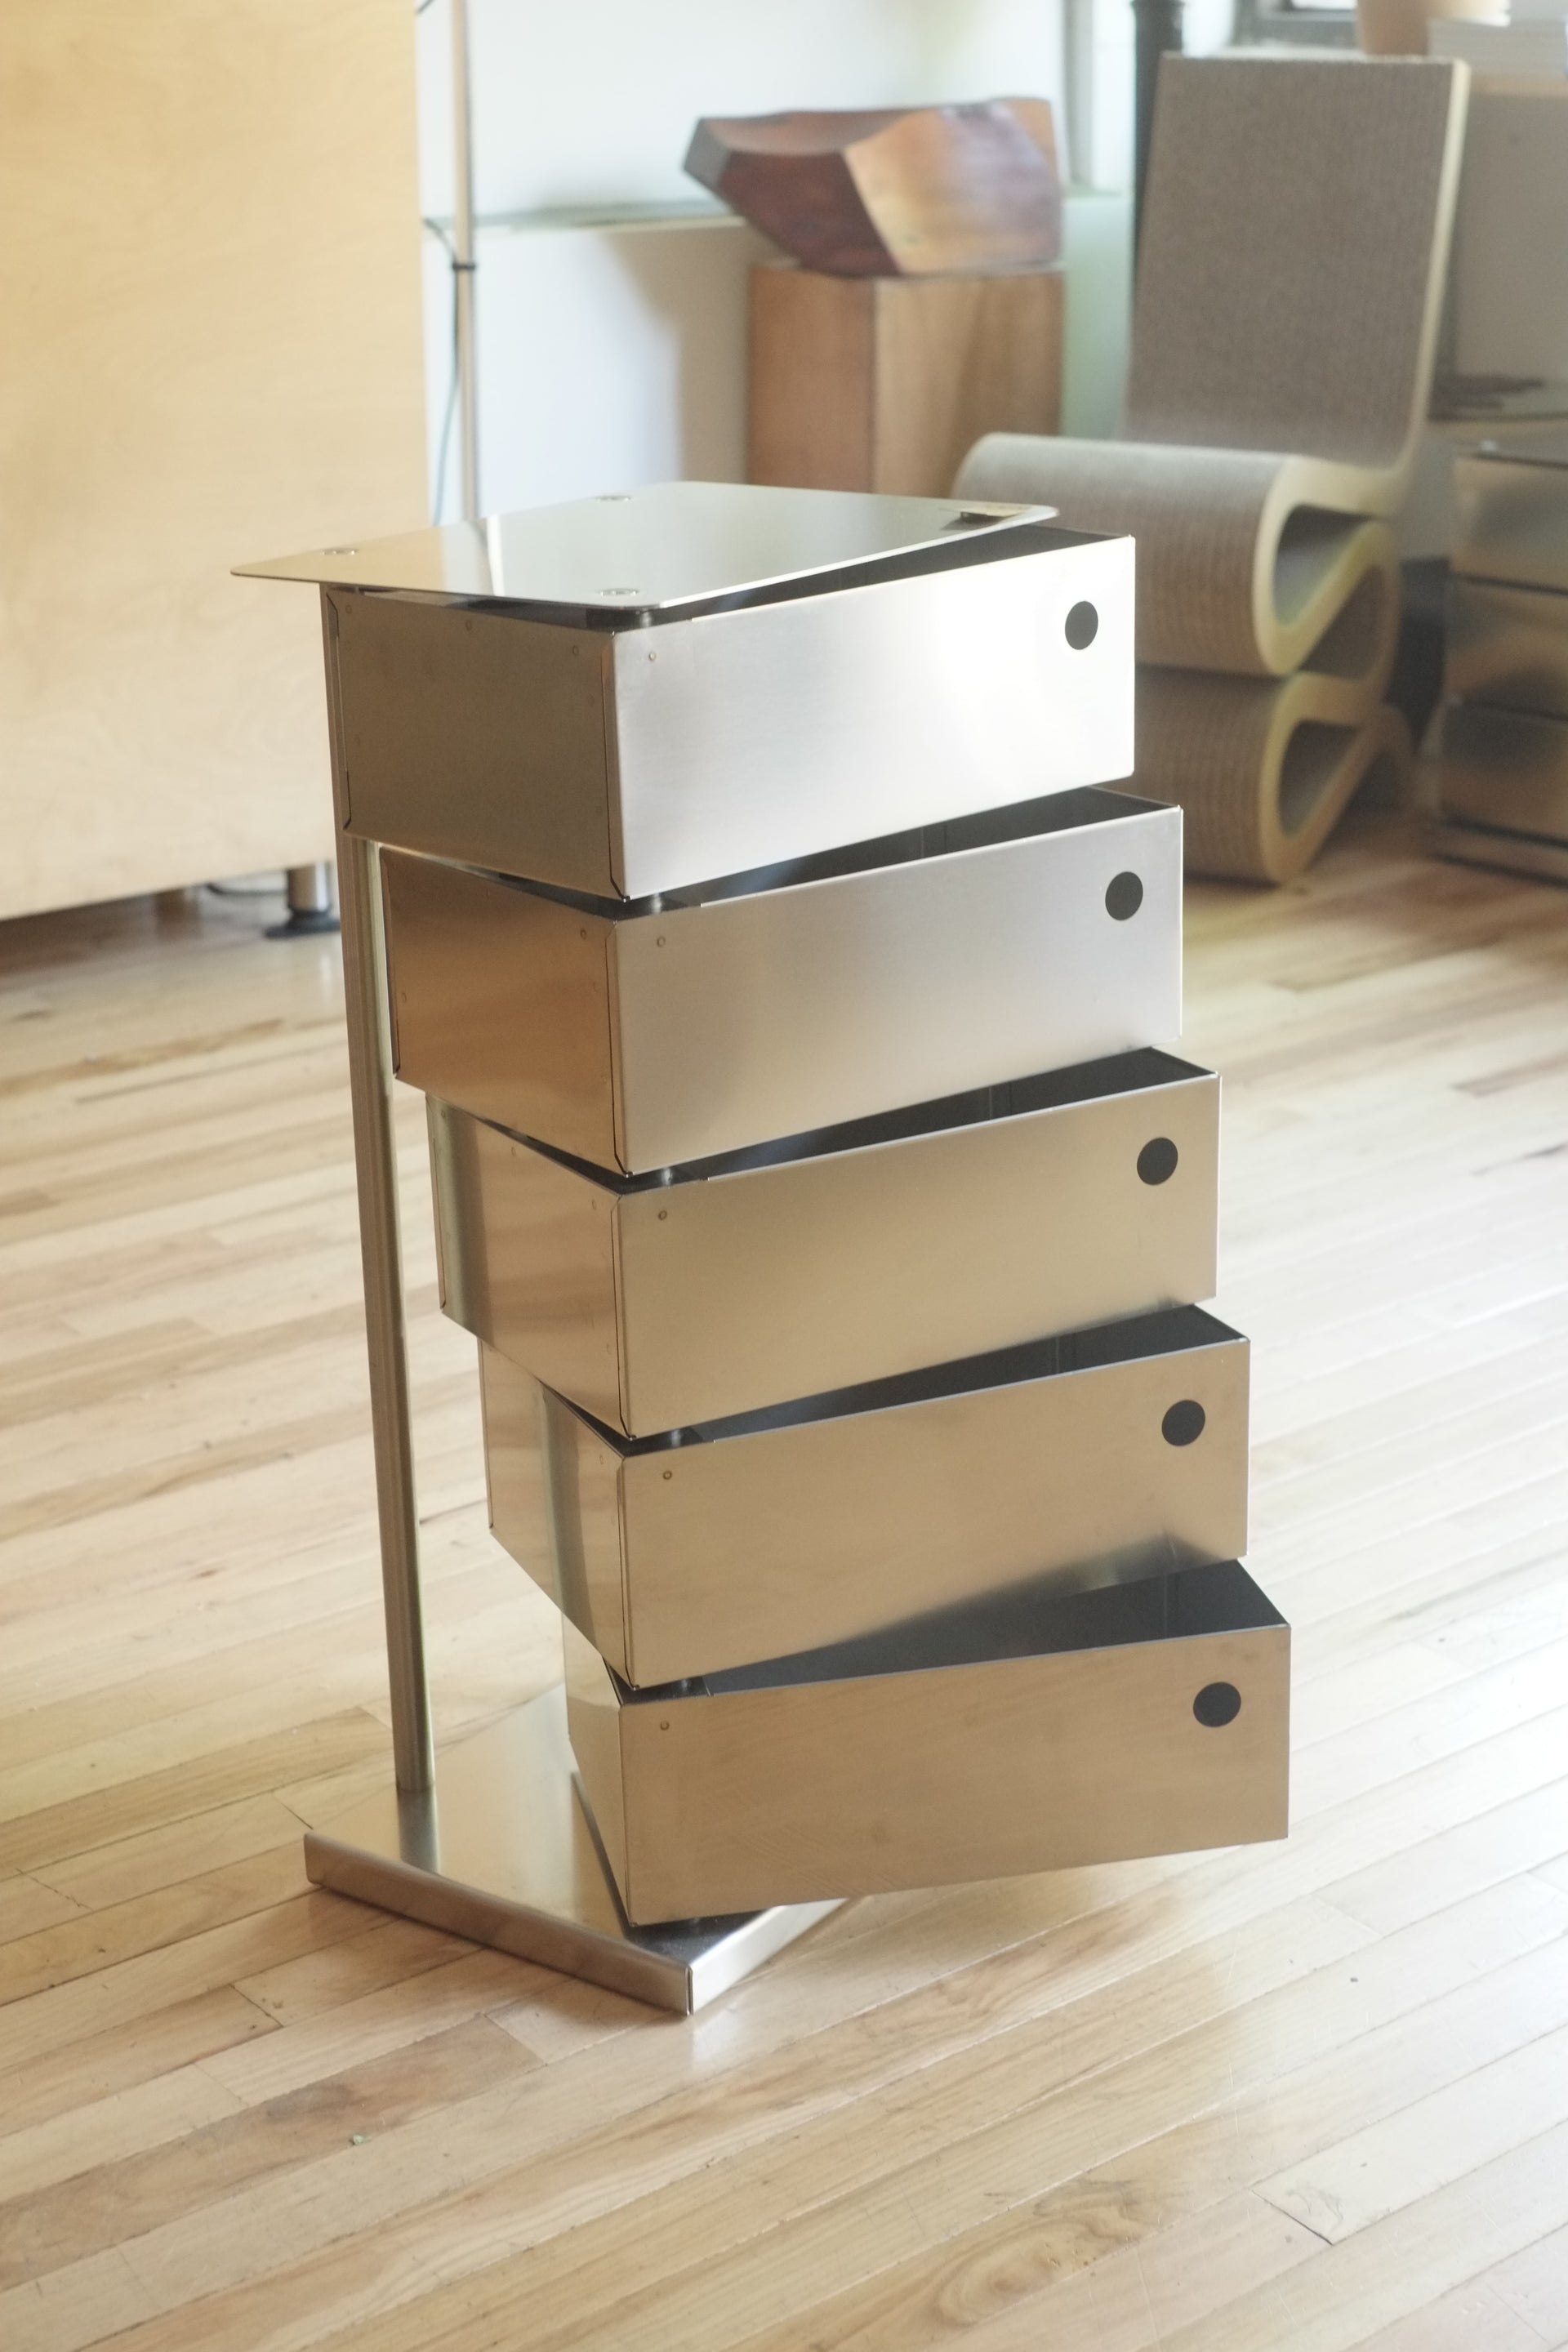 5-Drawer Pivot Cabinet (Stainless Steel)